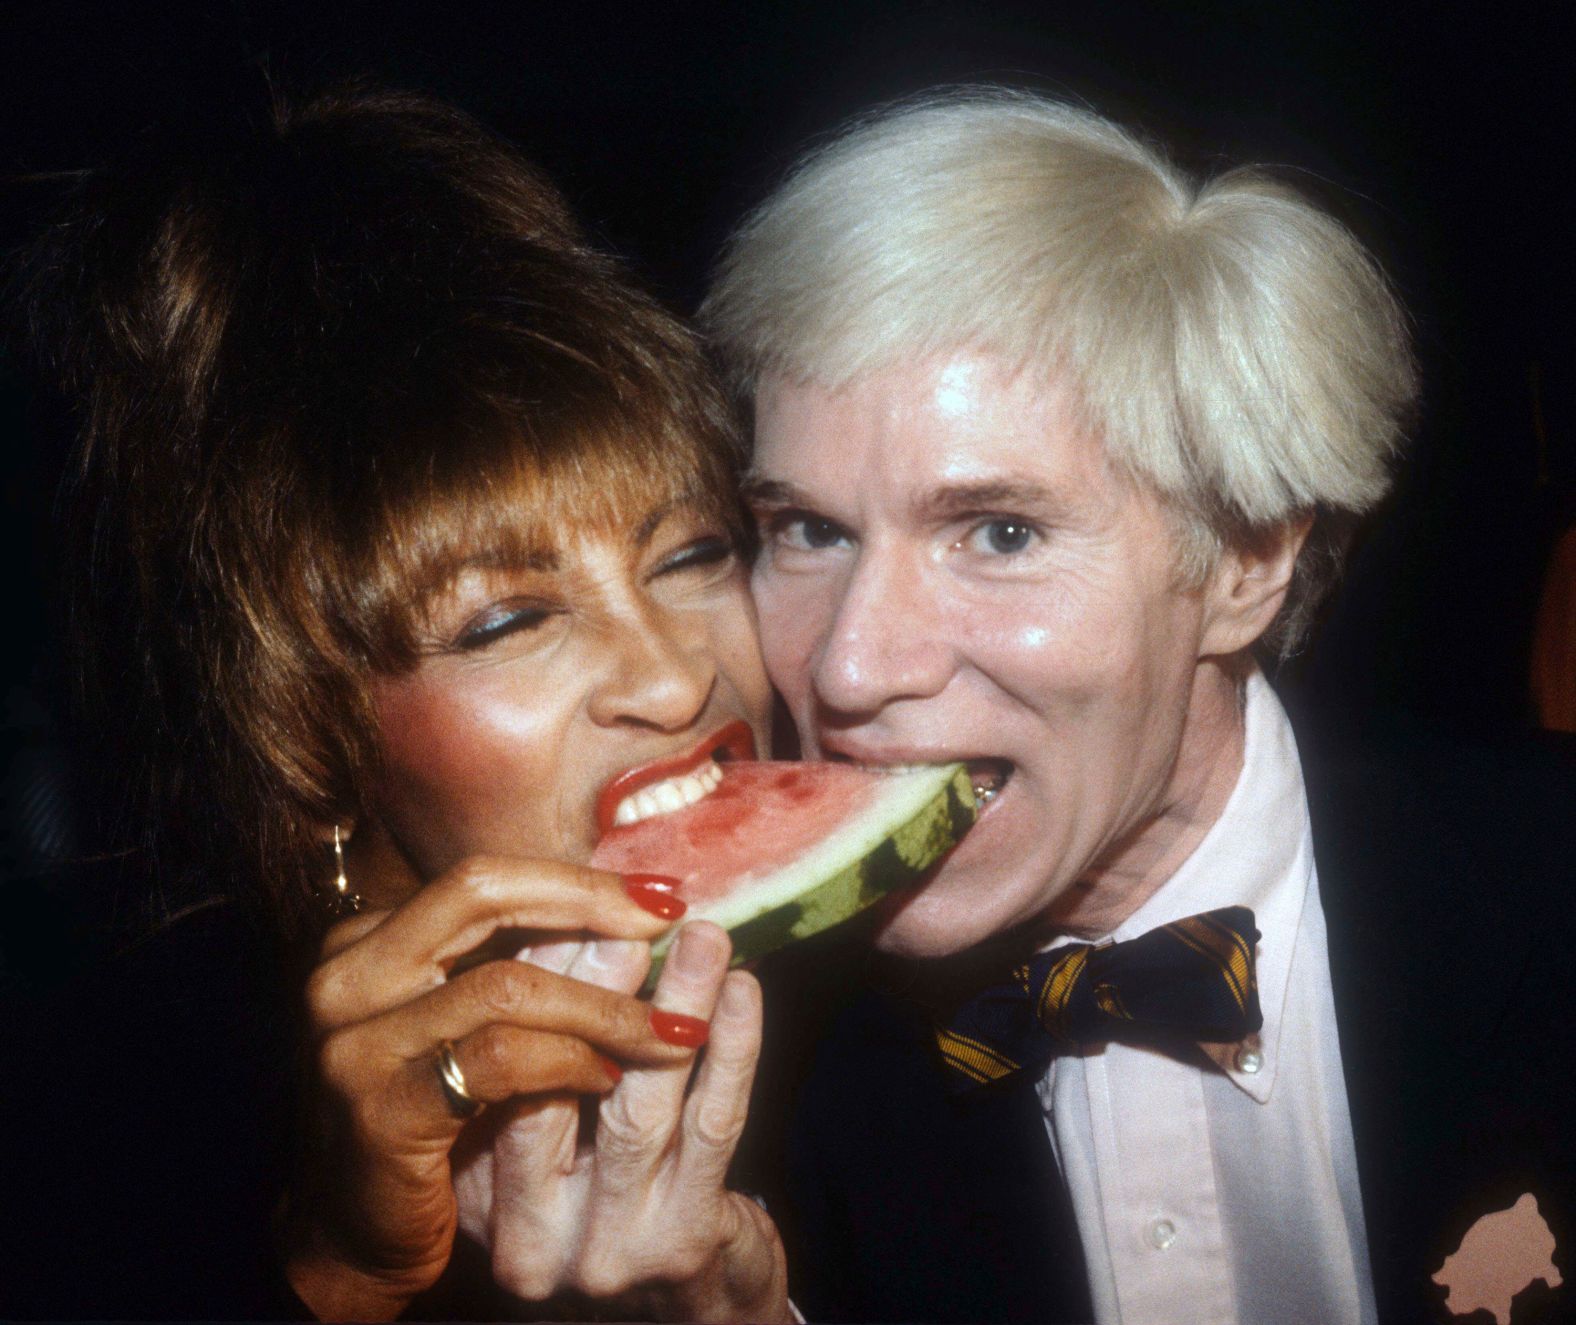 Turner and artist Andy Warhol share watermelon in 1981.